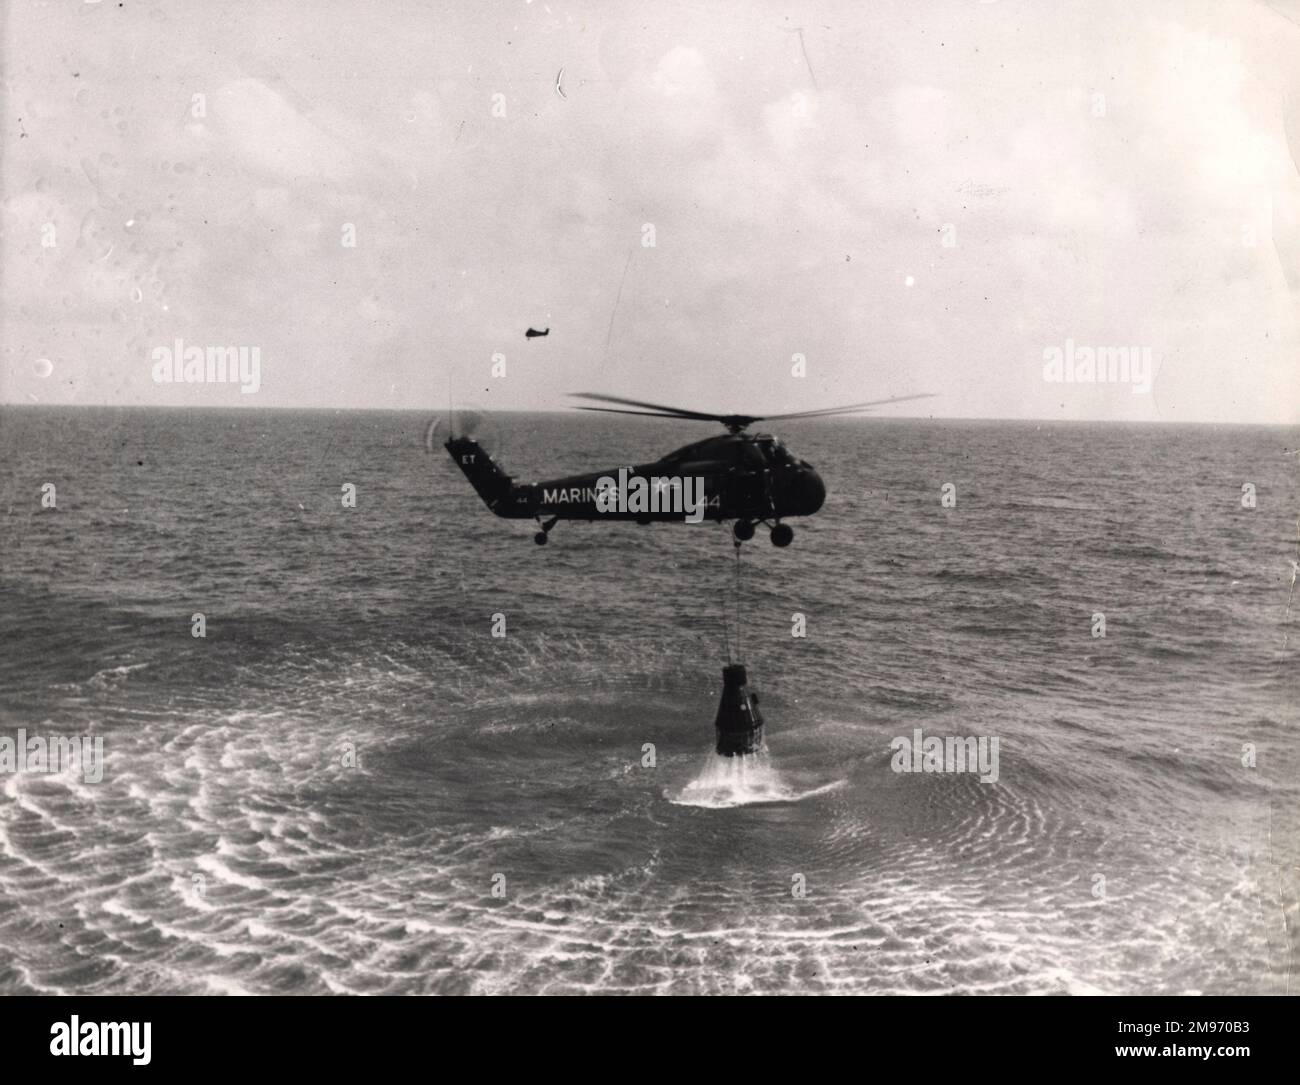 A Sikorsky UH-34 helicopter lifts the Mercury capsule, Freedom 7, out of the Atlantic following the first US sub-orbital spaceflight carrying astronaut Alan B. Shepard. 5 May 1961. Stock Photo